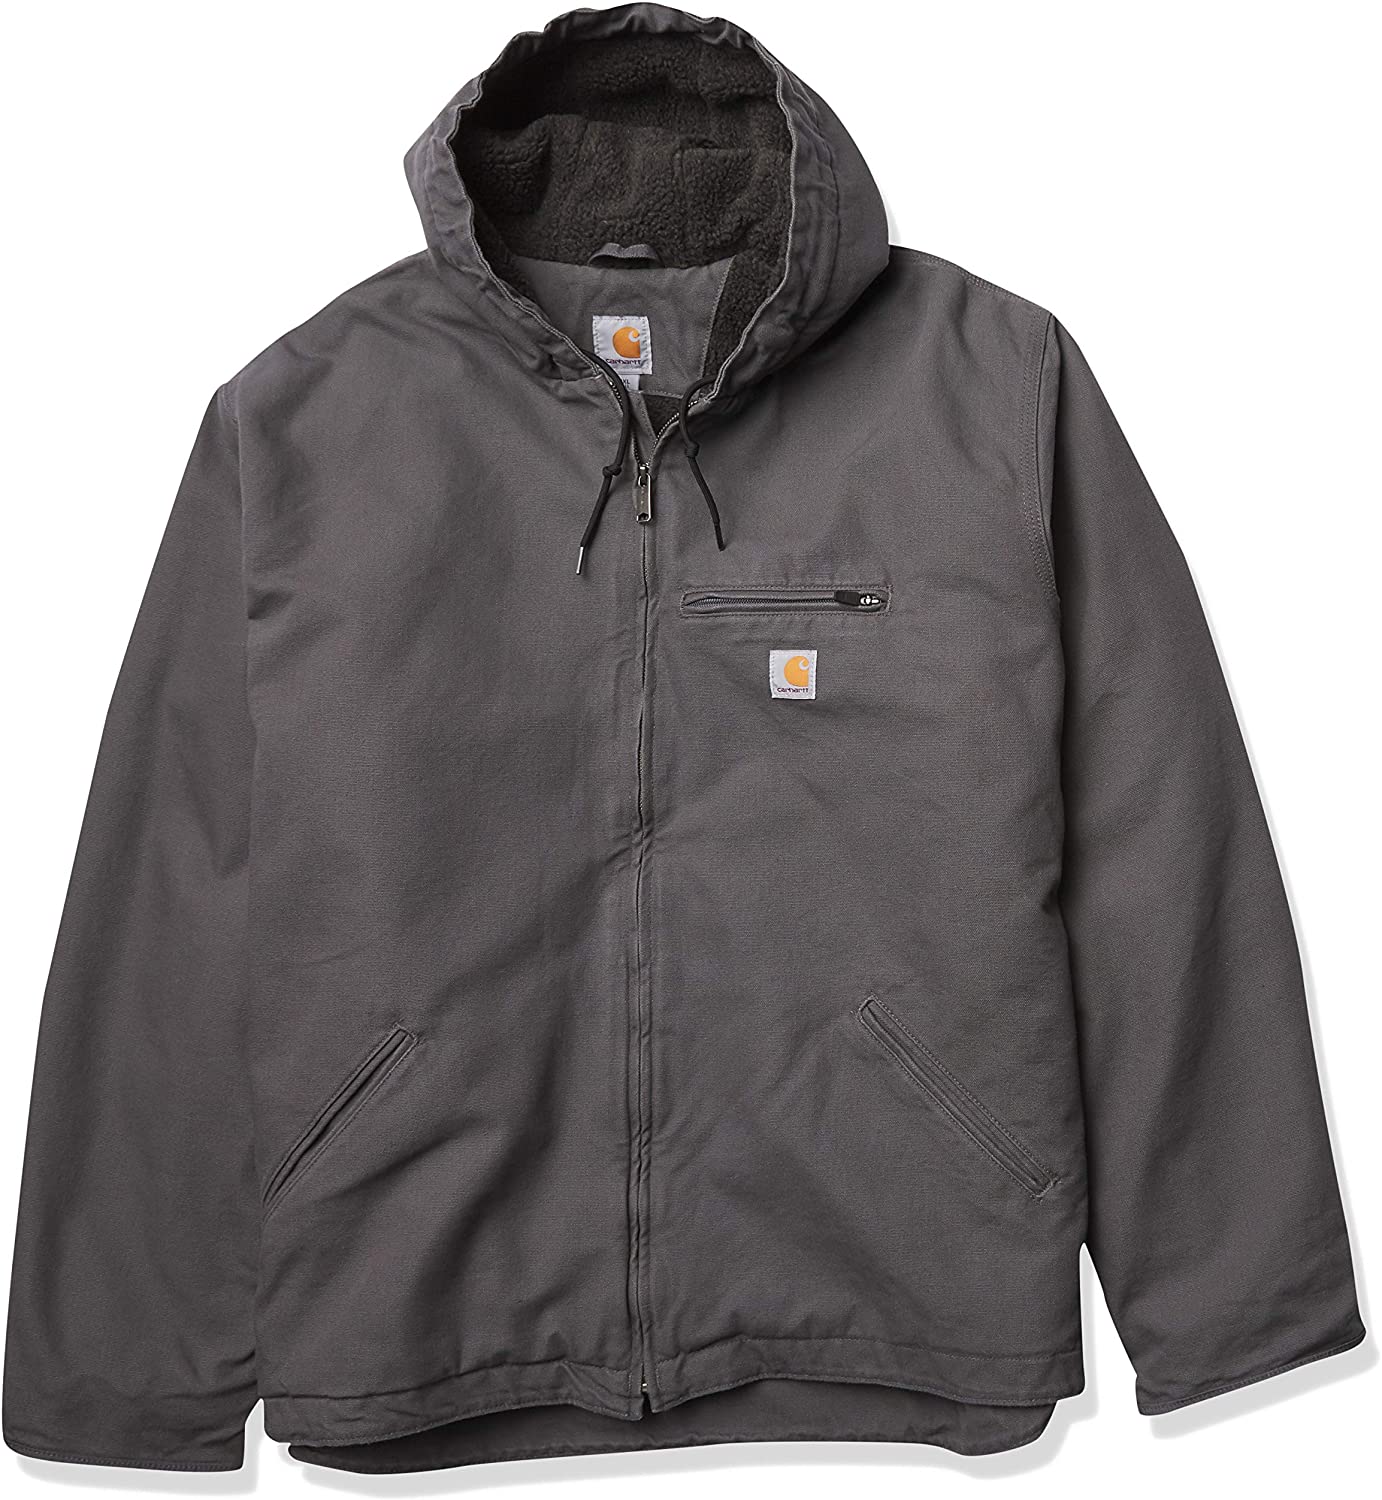 Carhartt Relaxed Fit Washed Sherpa-Lined Jacket | eBay